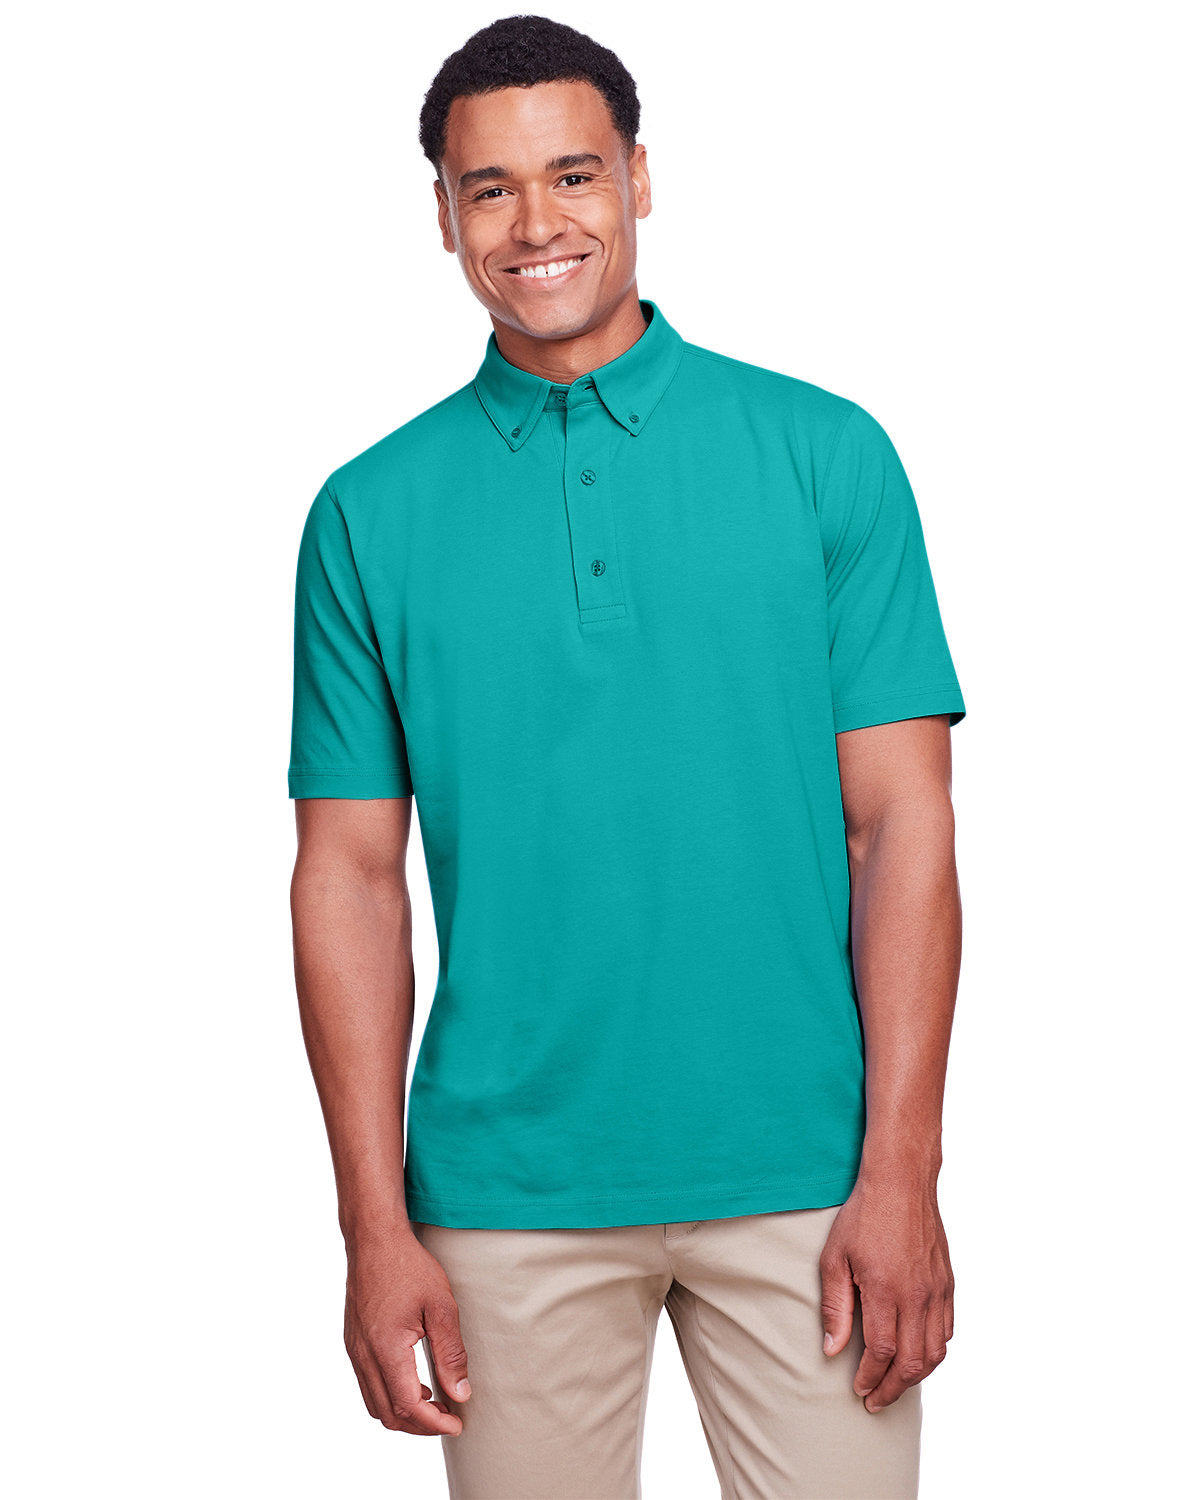 Rainwater's Stretch Button Down Collar Polo In Teal - Rainwater's Men's Clothing and Tuxedo Rental